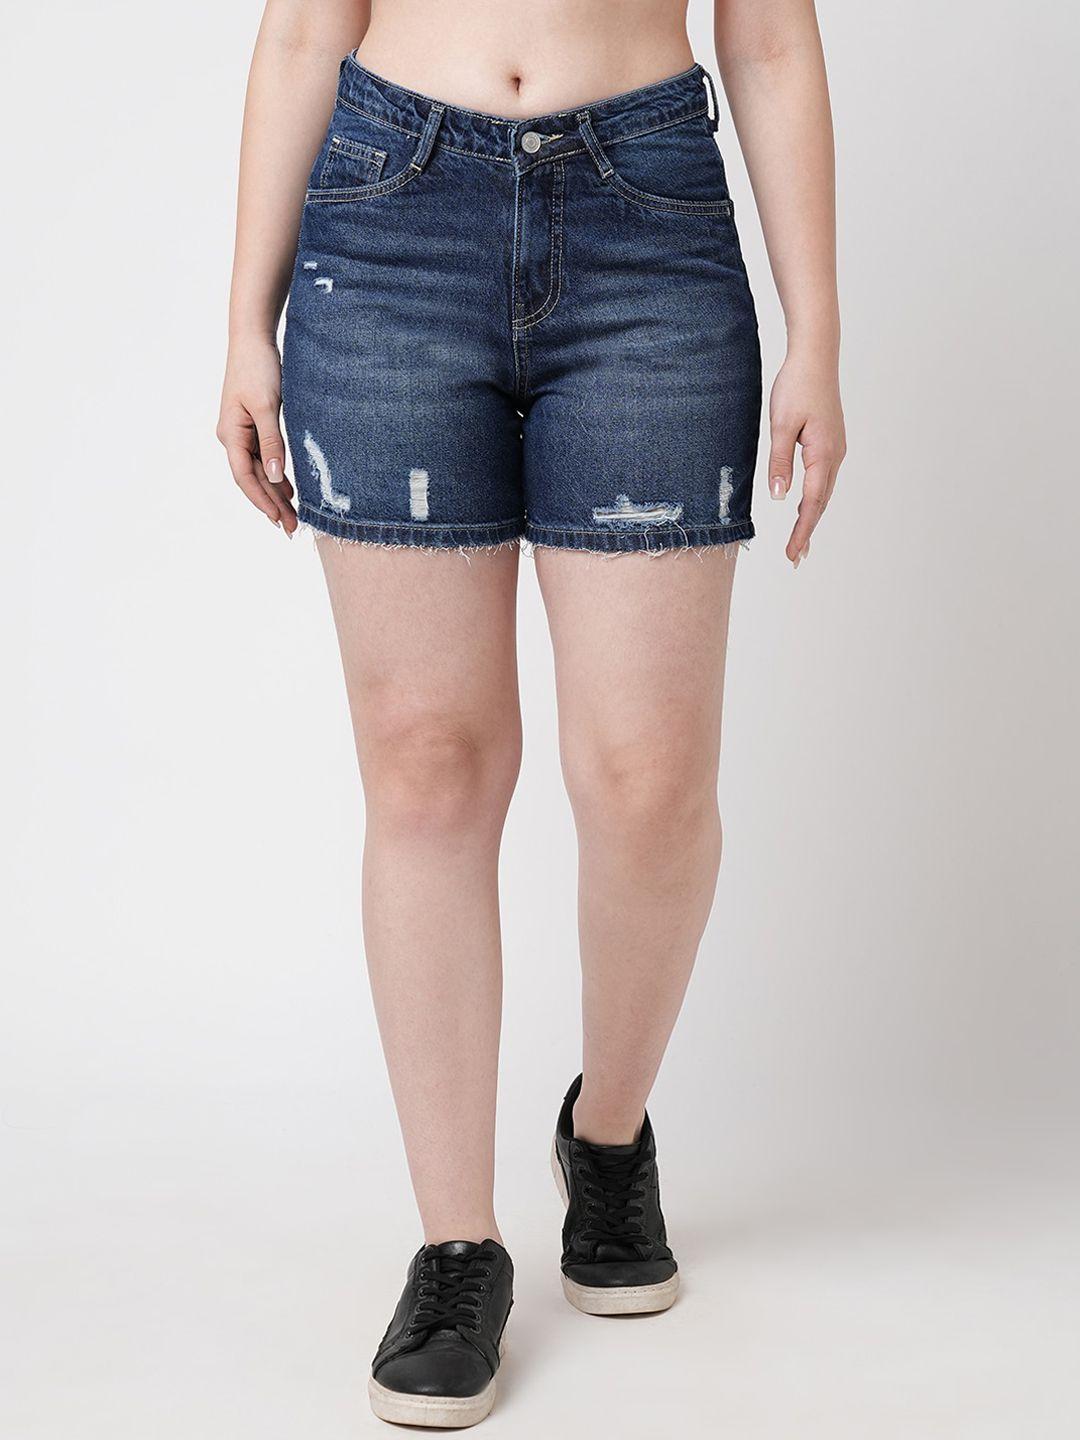 kraus-jeans-women-washed-slim-fit-high-rise-pure-cotton-denim-shorts